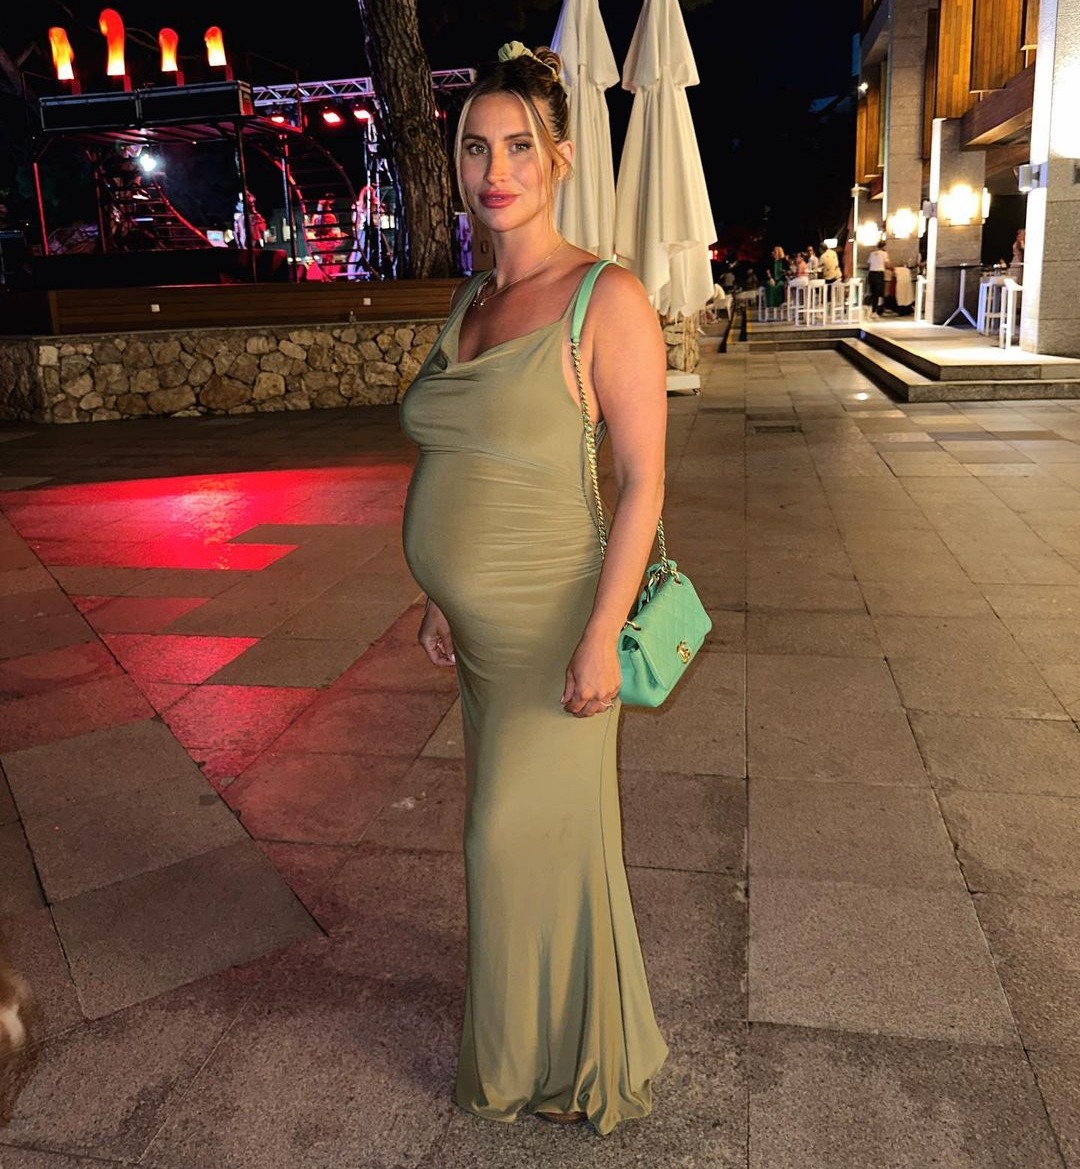 Inside pregnant Ferne McCann’s holiday to Turkey with fiance and daughter as she tells fans ‘this is all I ever wanted’